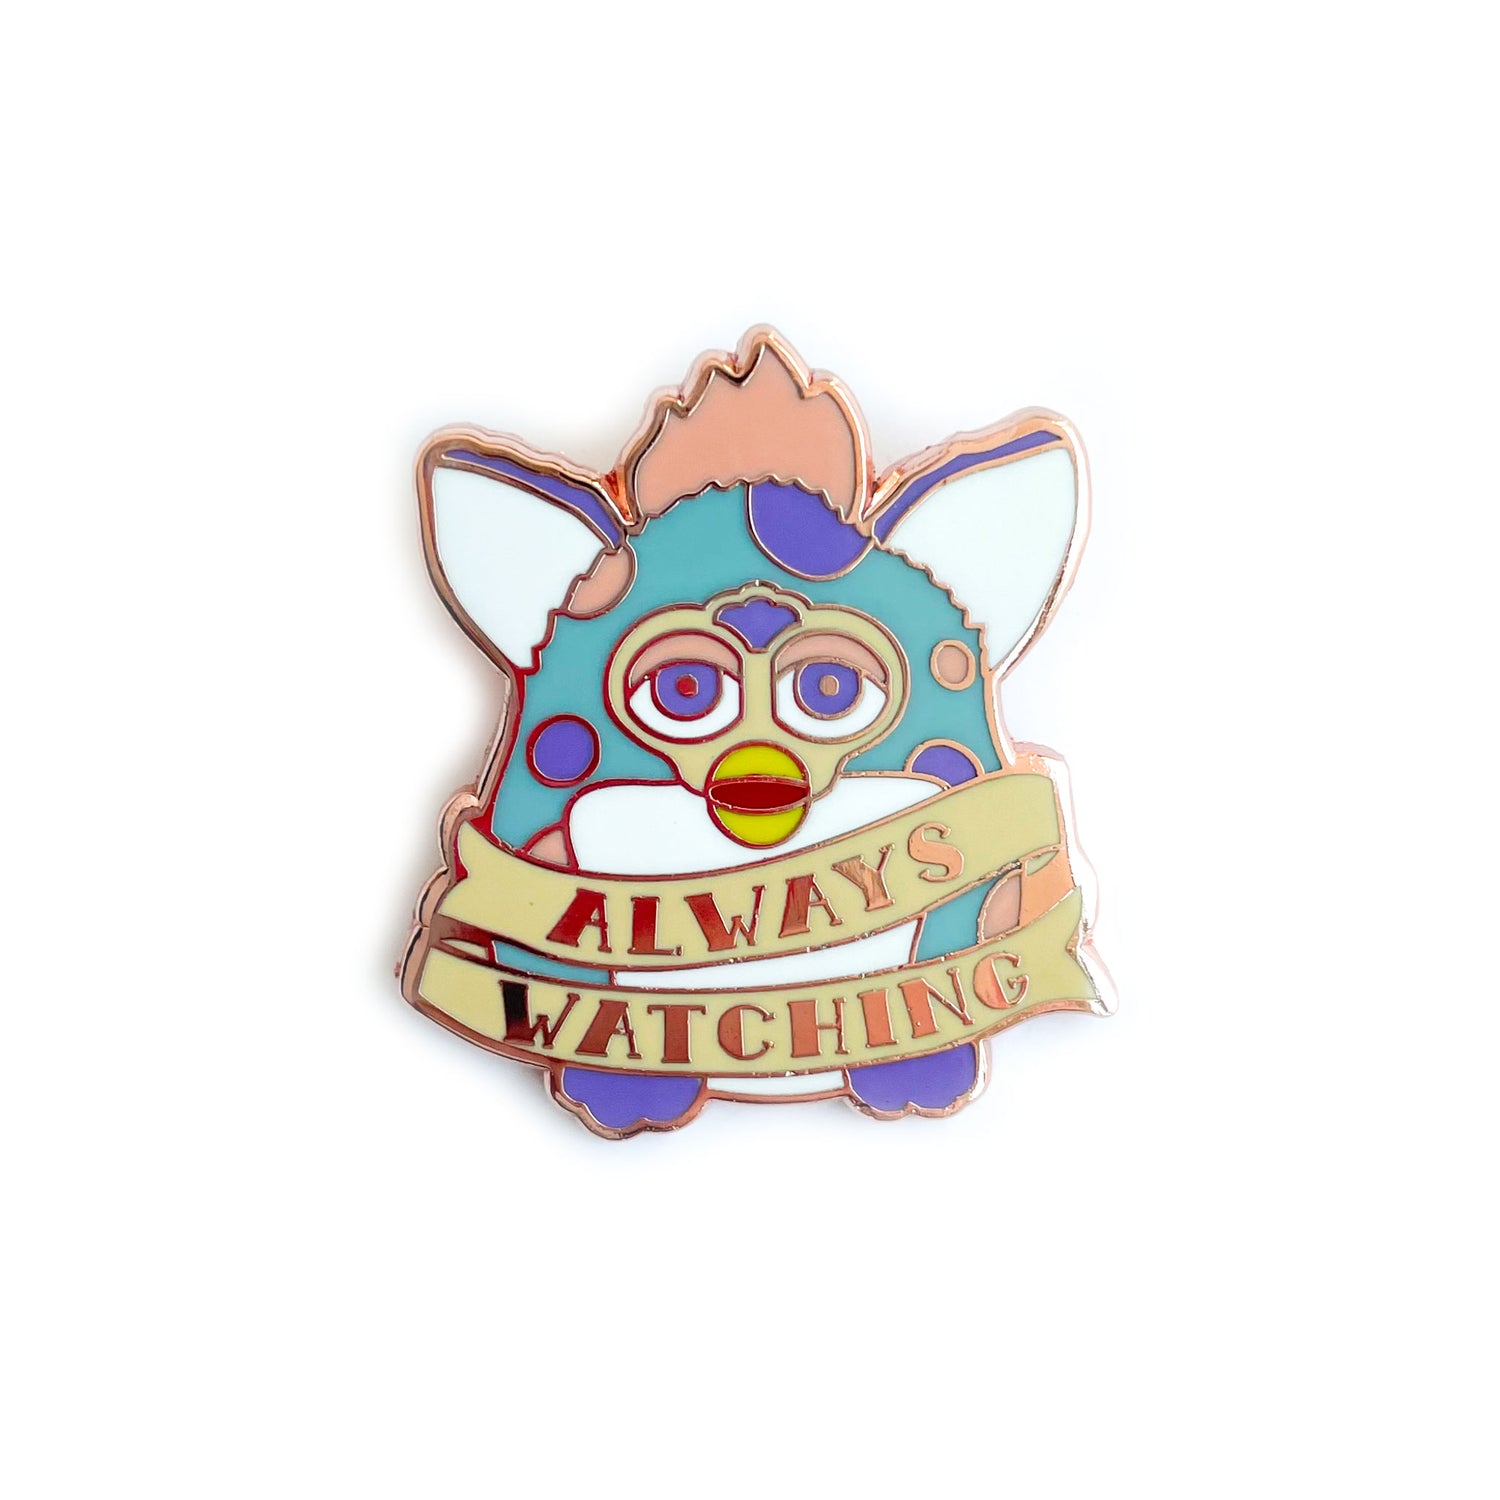 An enamel pin in the shape of a Furby with a tattoo style banner around its body that says "Always Watching". The Furby is light blue with peach and lavender spots. 